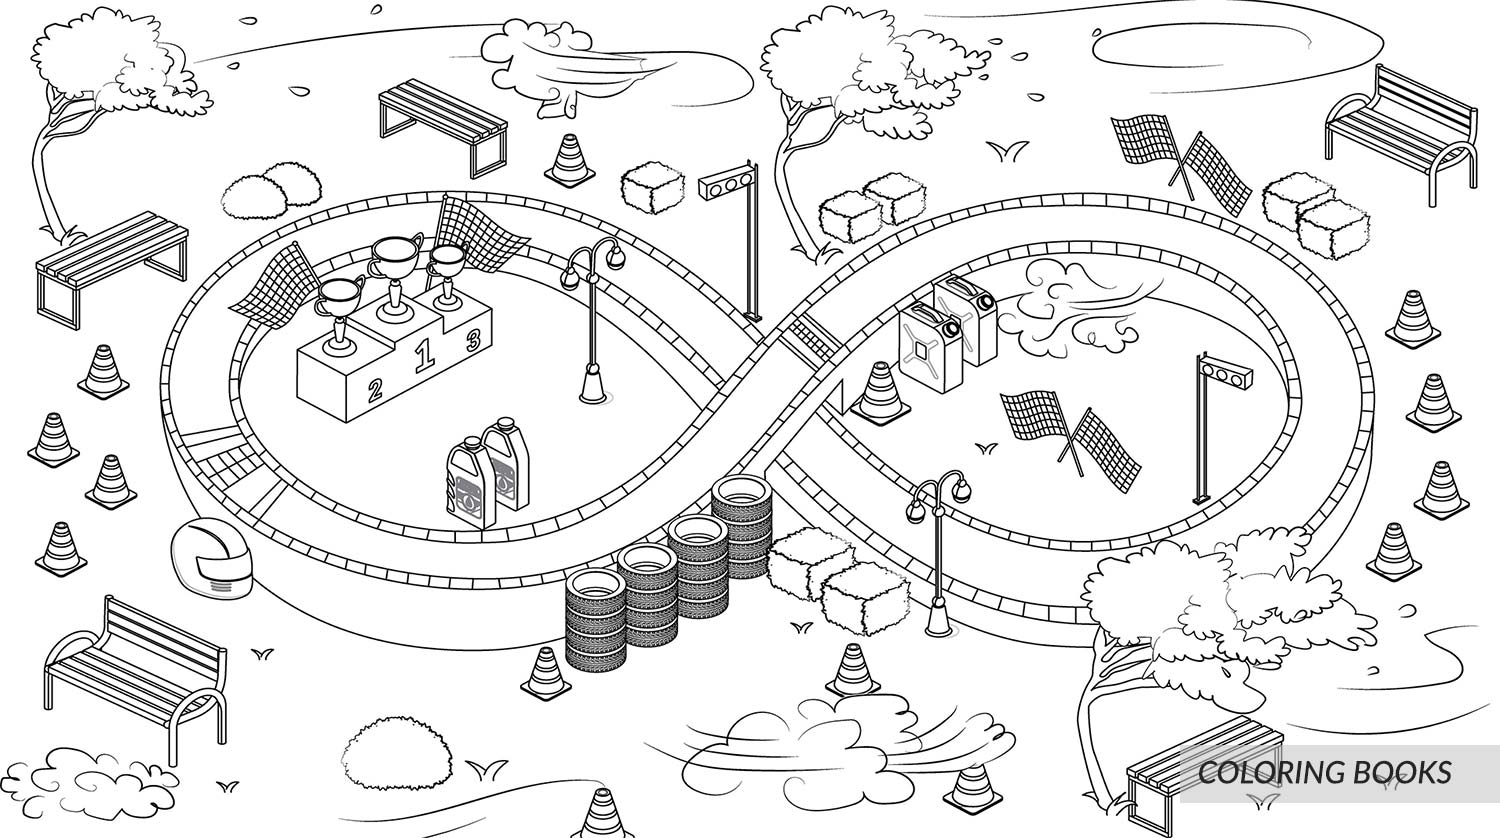 Line art of a car racing track, with tyres stacks on sides, benches and tree's also added